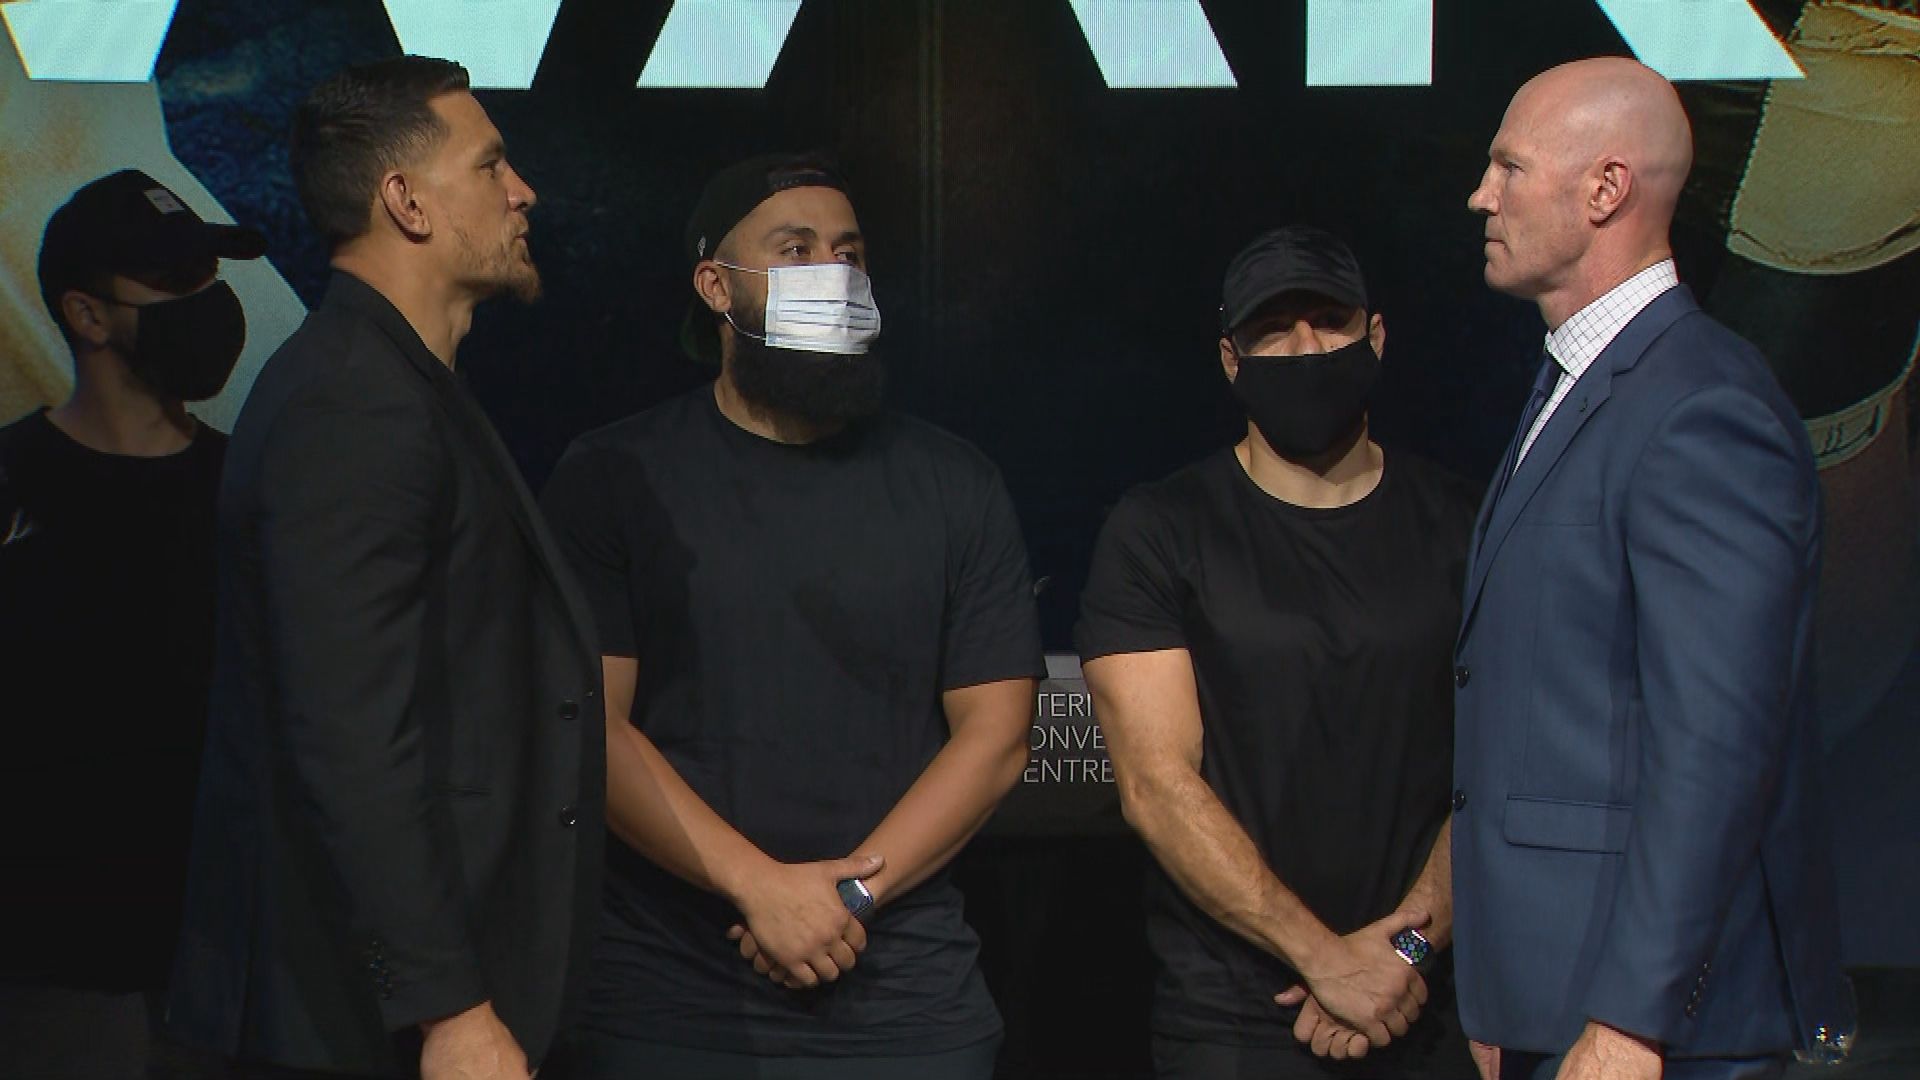 EXCLUSIVE: Sonny Bill Williams on 'joke' Barry Hall claim ahead of March 23 fight